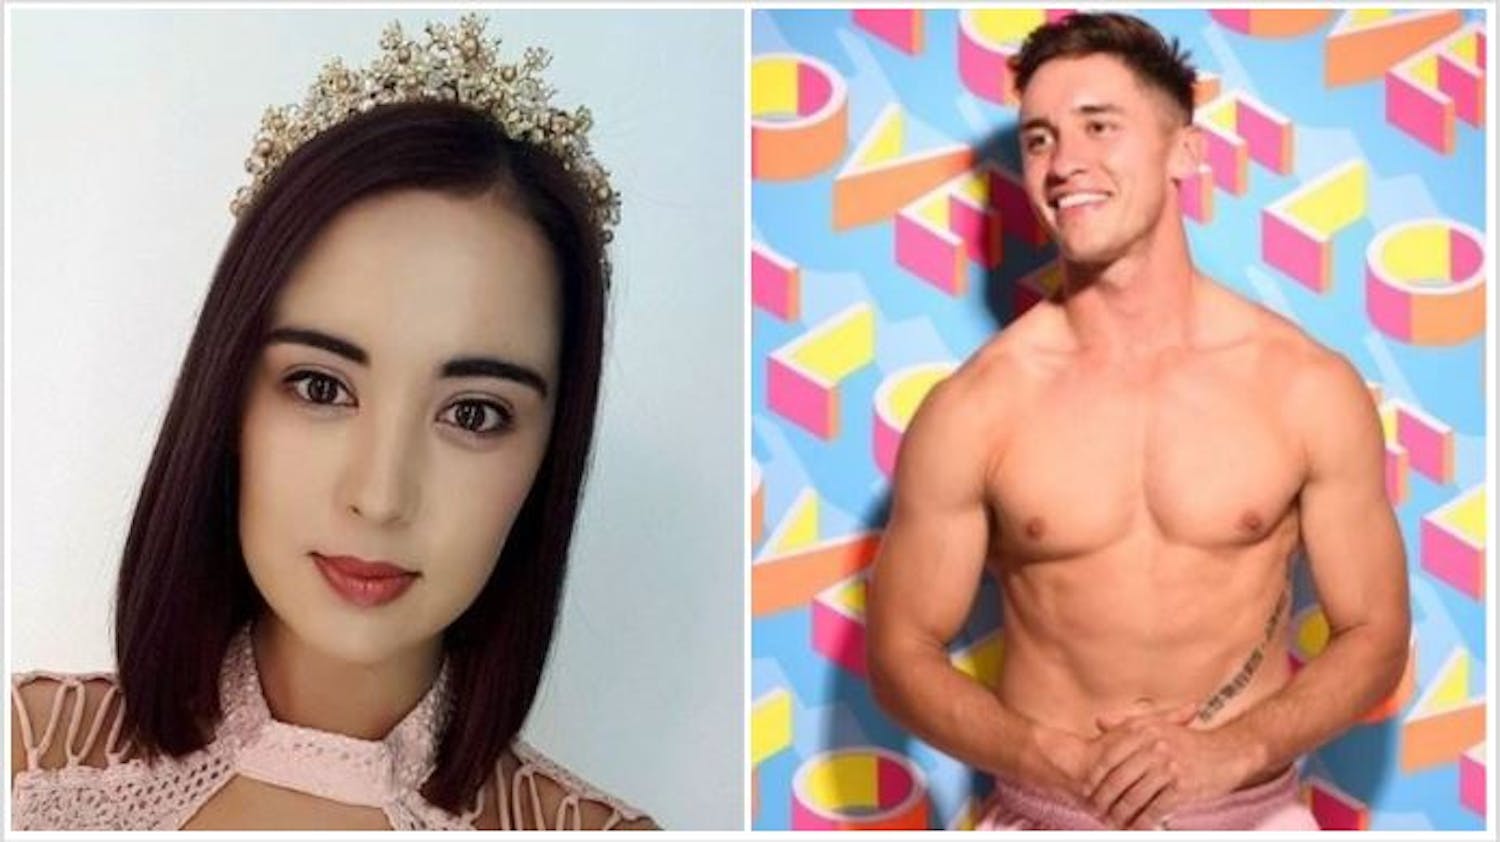 Sister Of Love Island's Latest Limerick Star Chats To Muireann